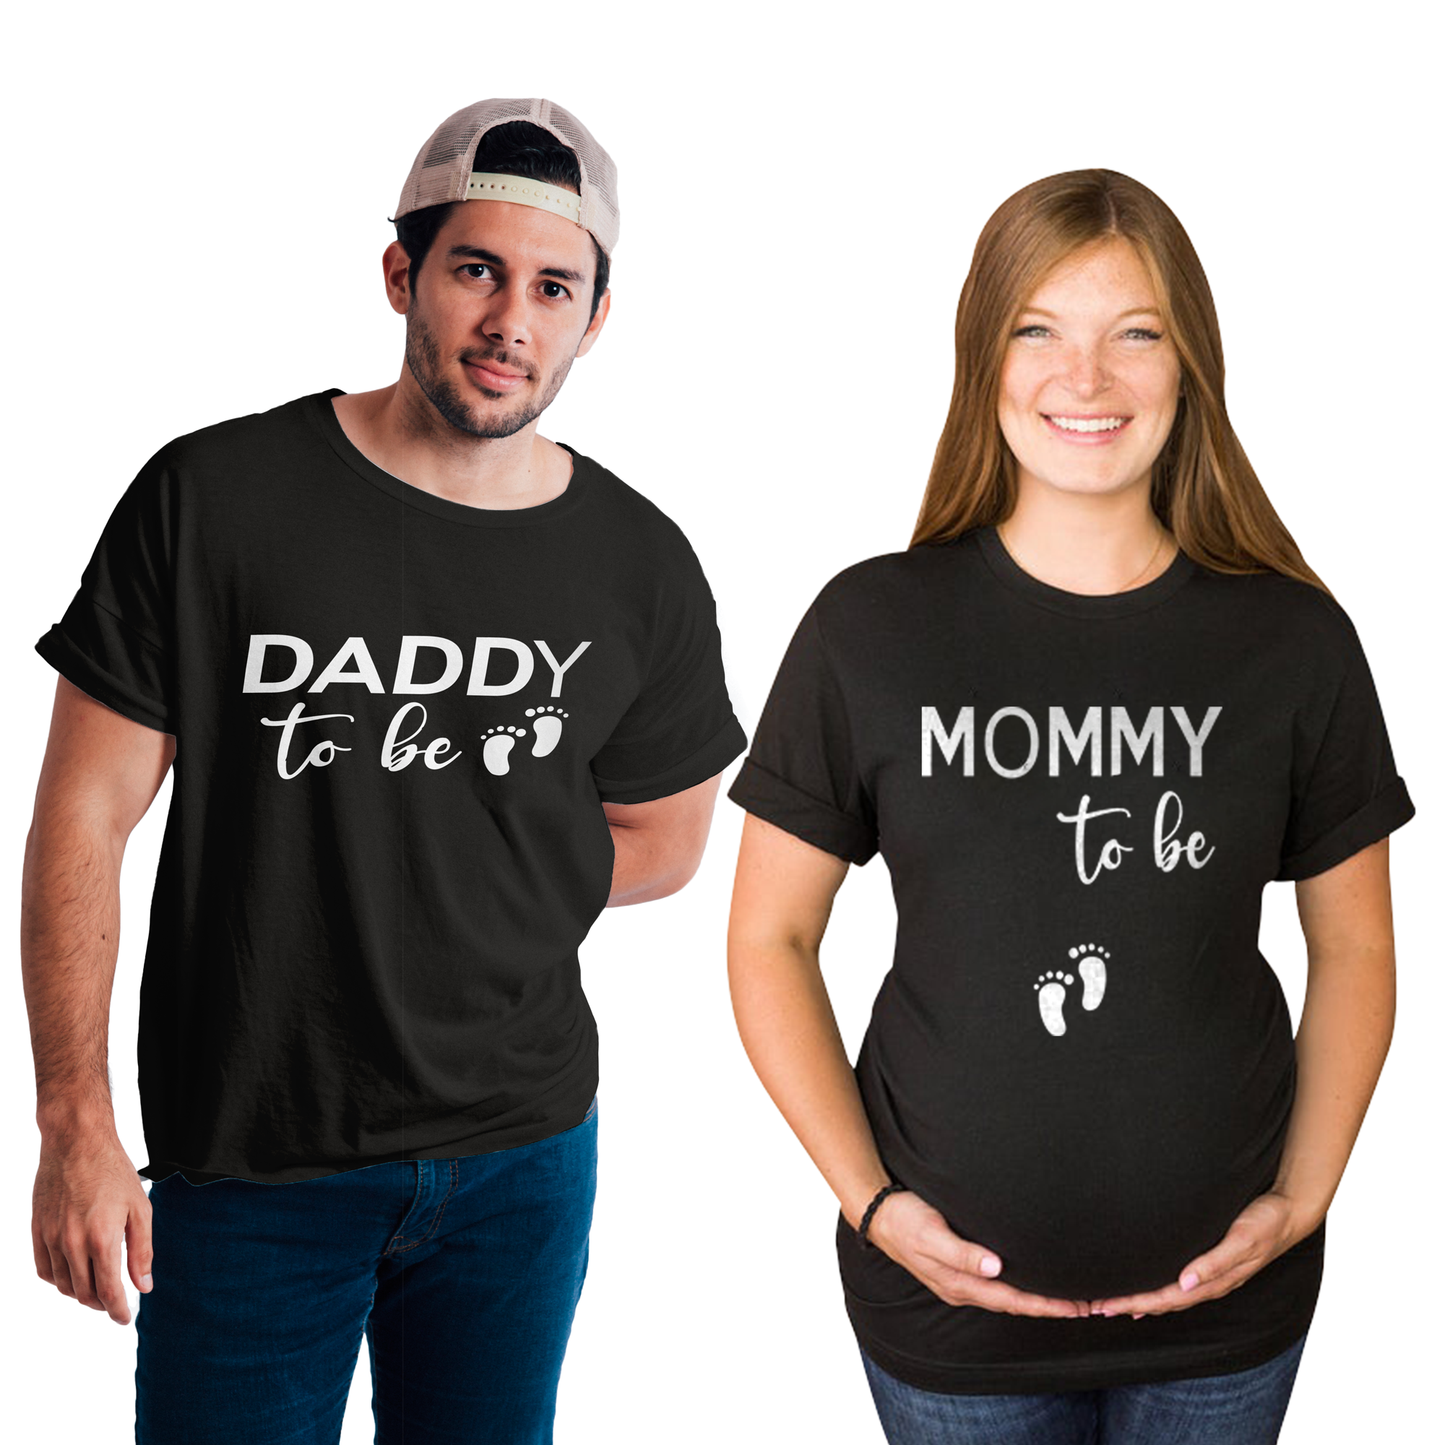 Mommy to be & Daddy to be Maternity Dress|Maternity Couple T shirts- Black